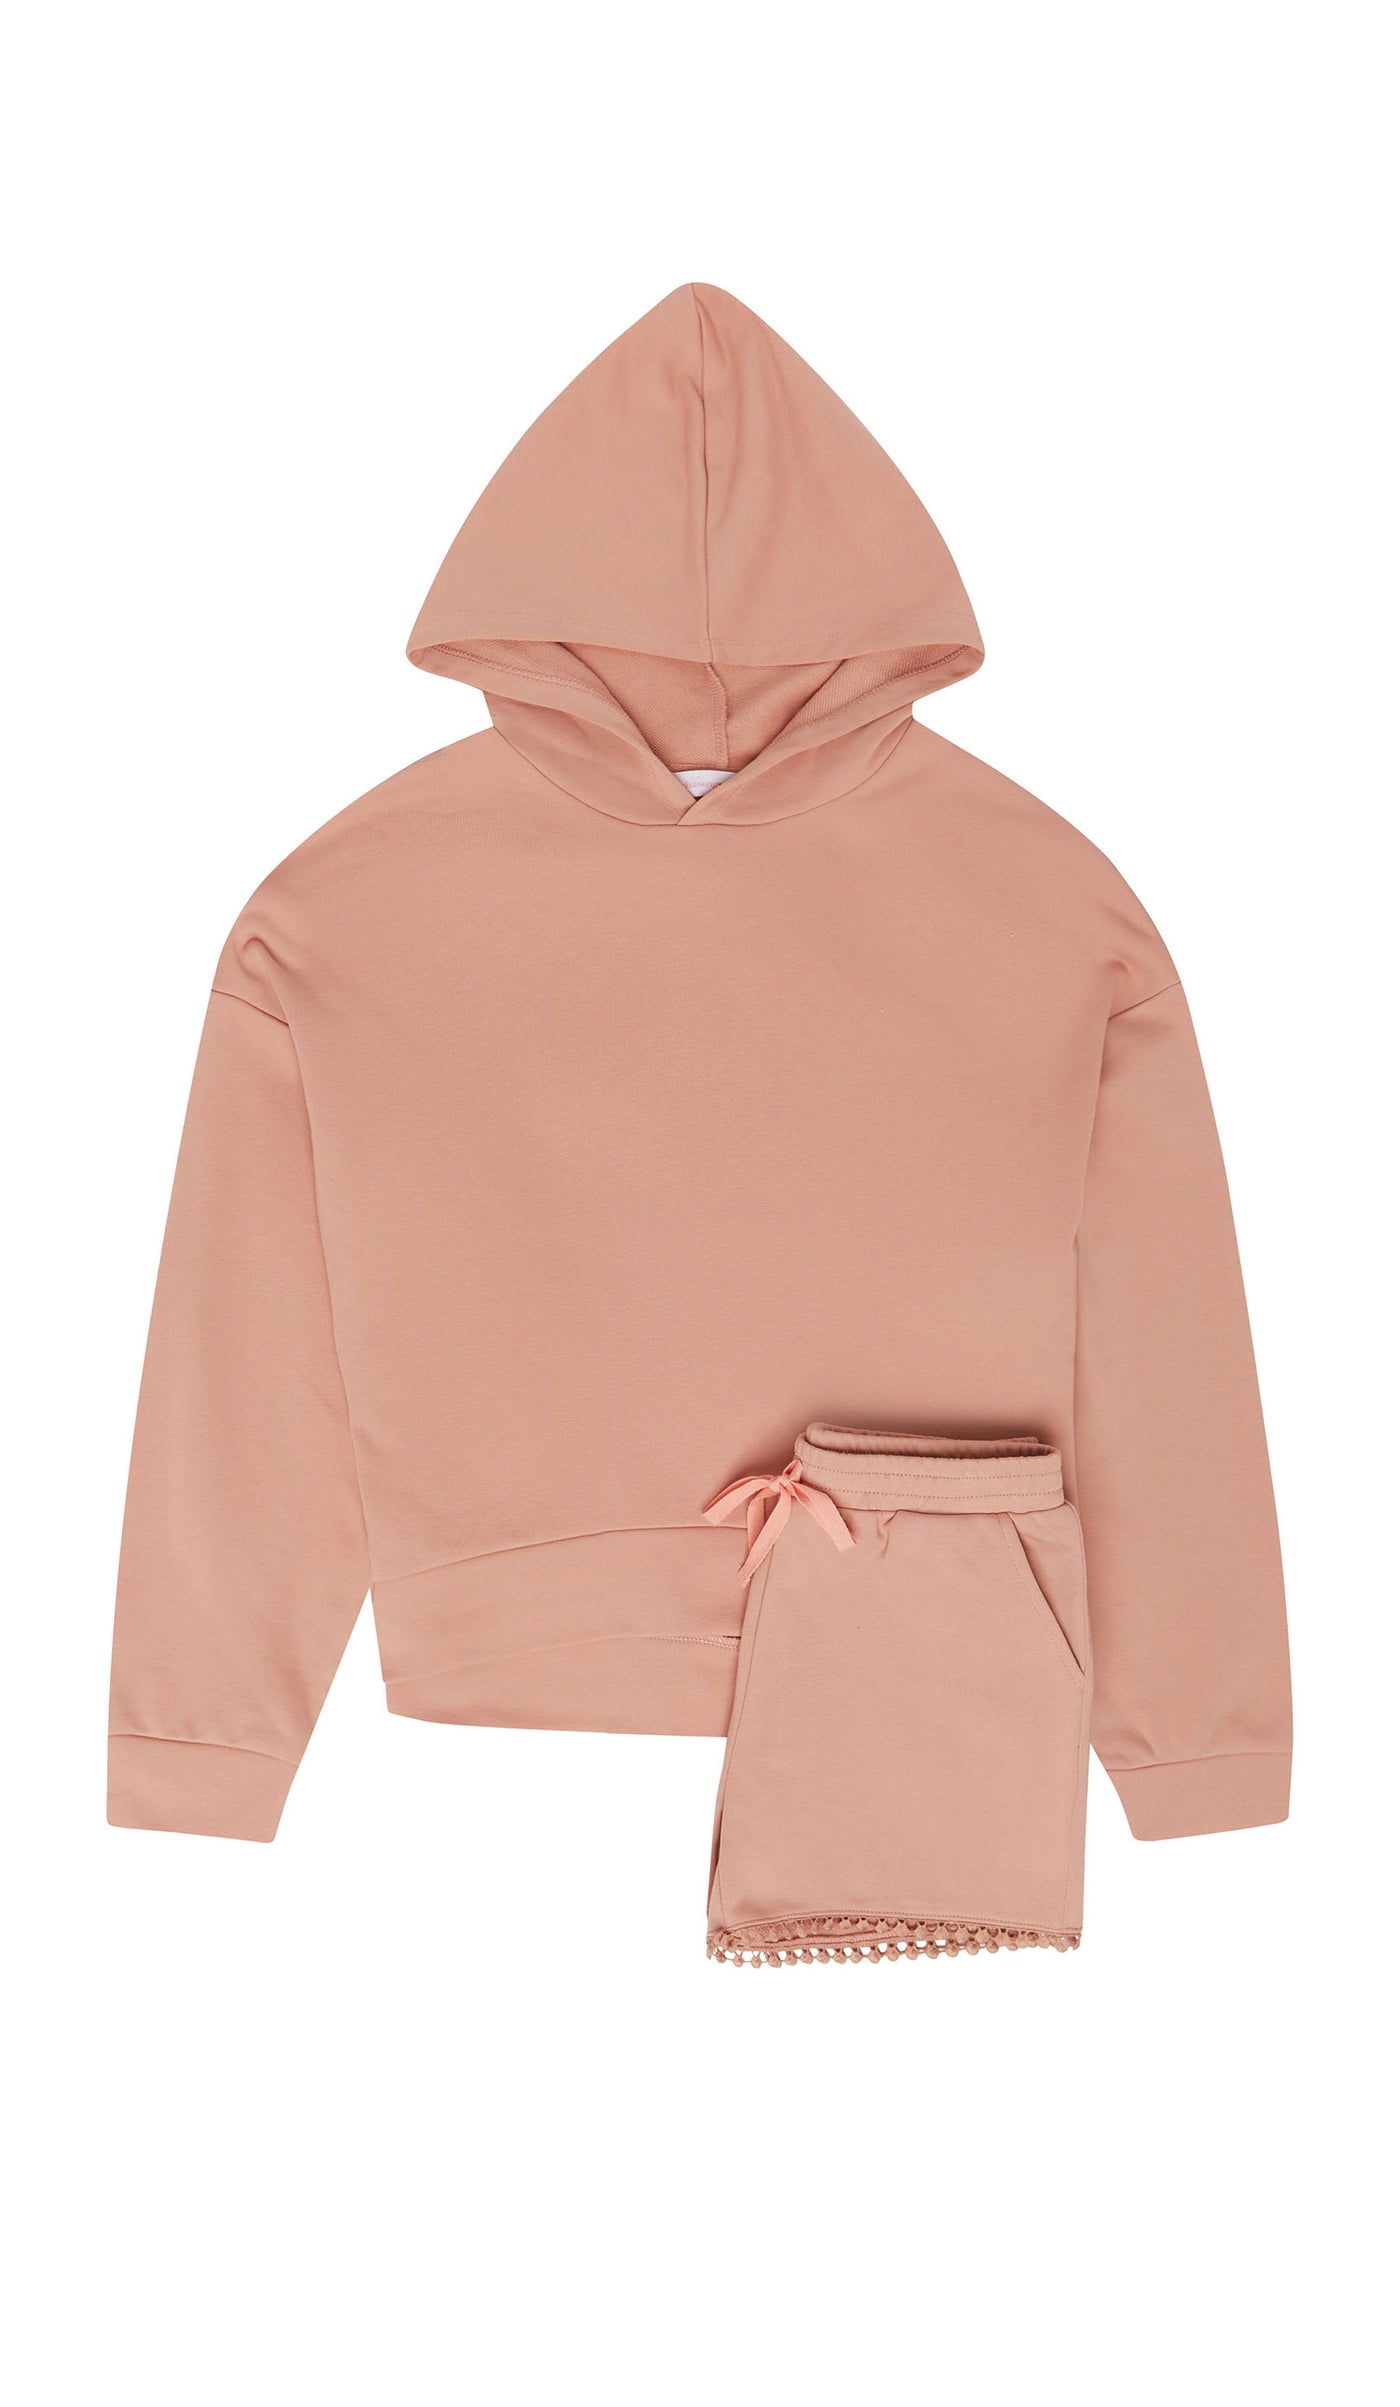 Blush pink hoodie and shorts